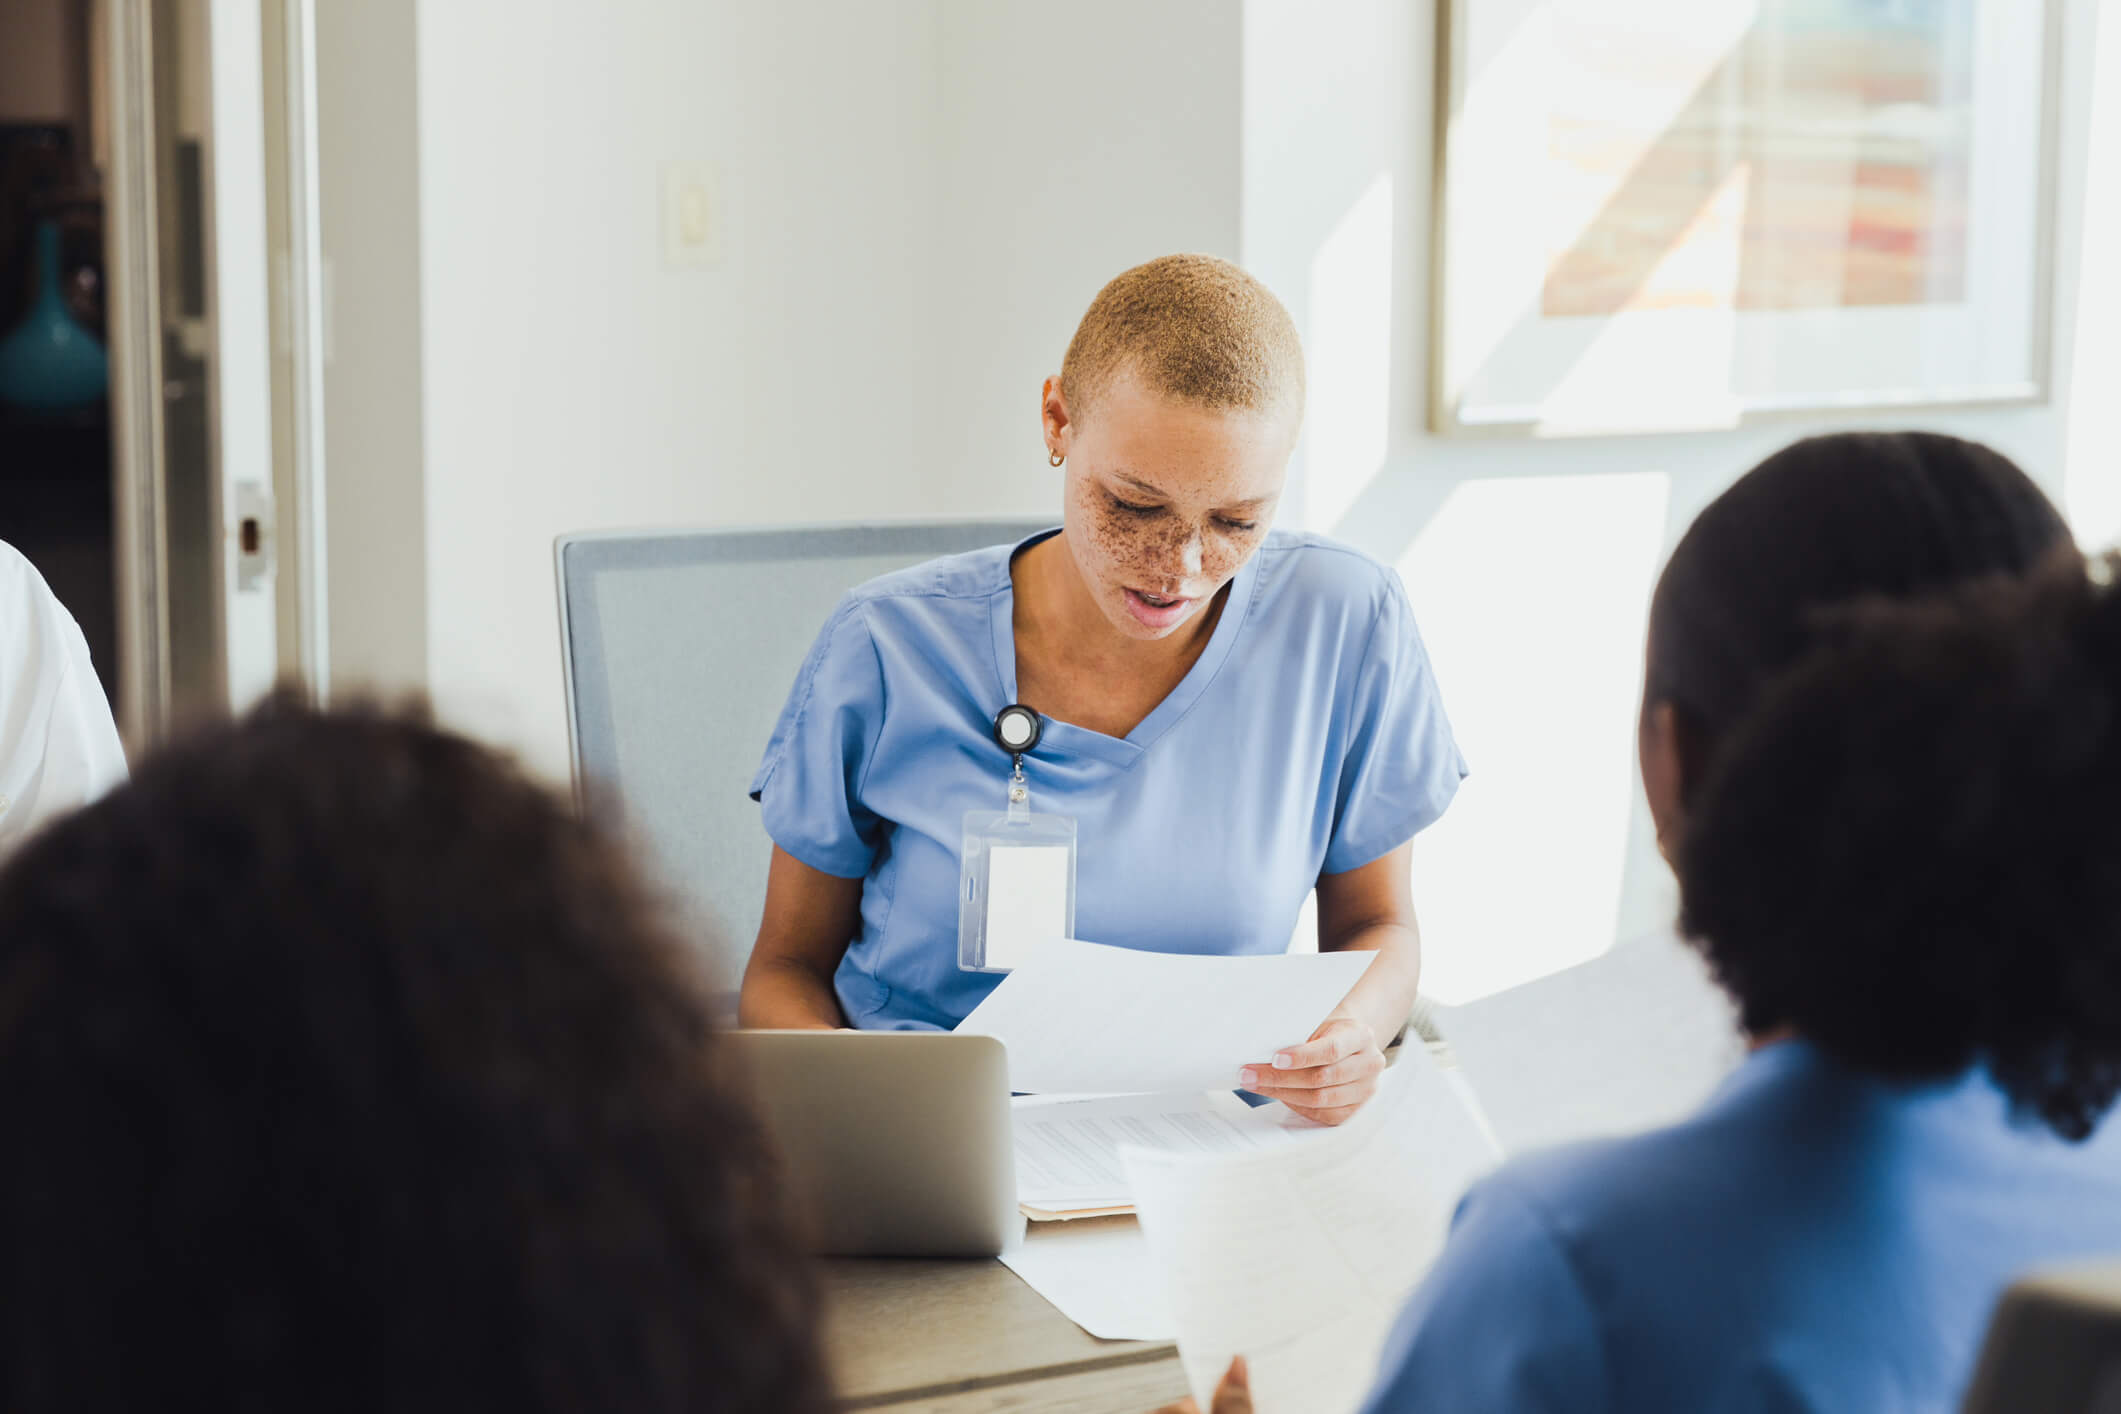 A healthcare professional reads a medical document during a meeting with a group of colleagues.